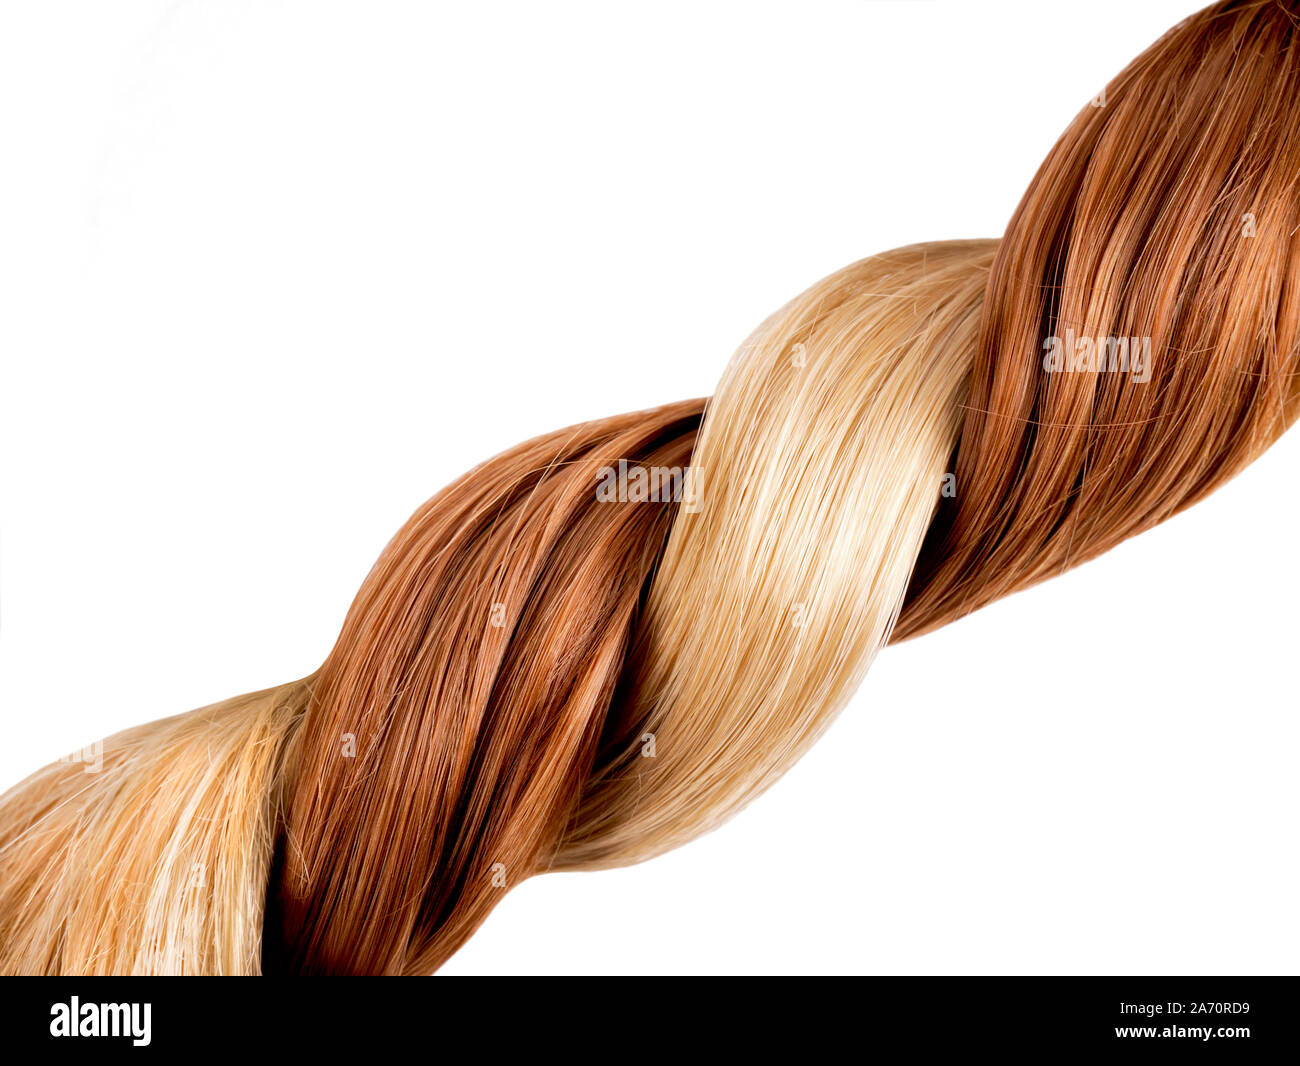 Blond and red hair braid on white background Stock Photo